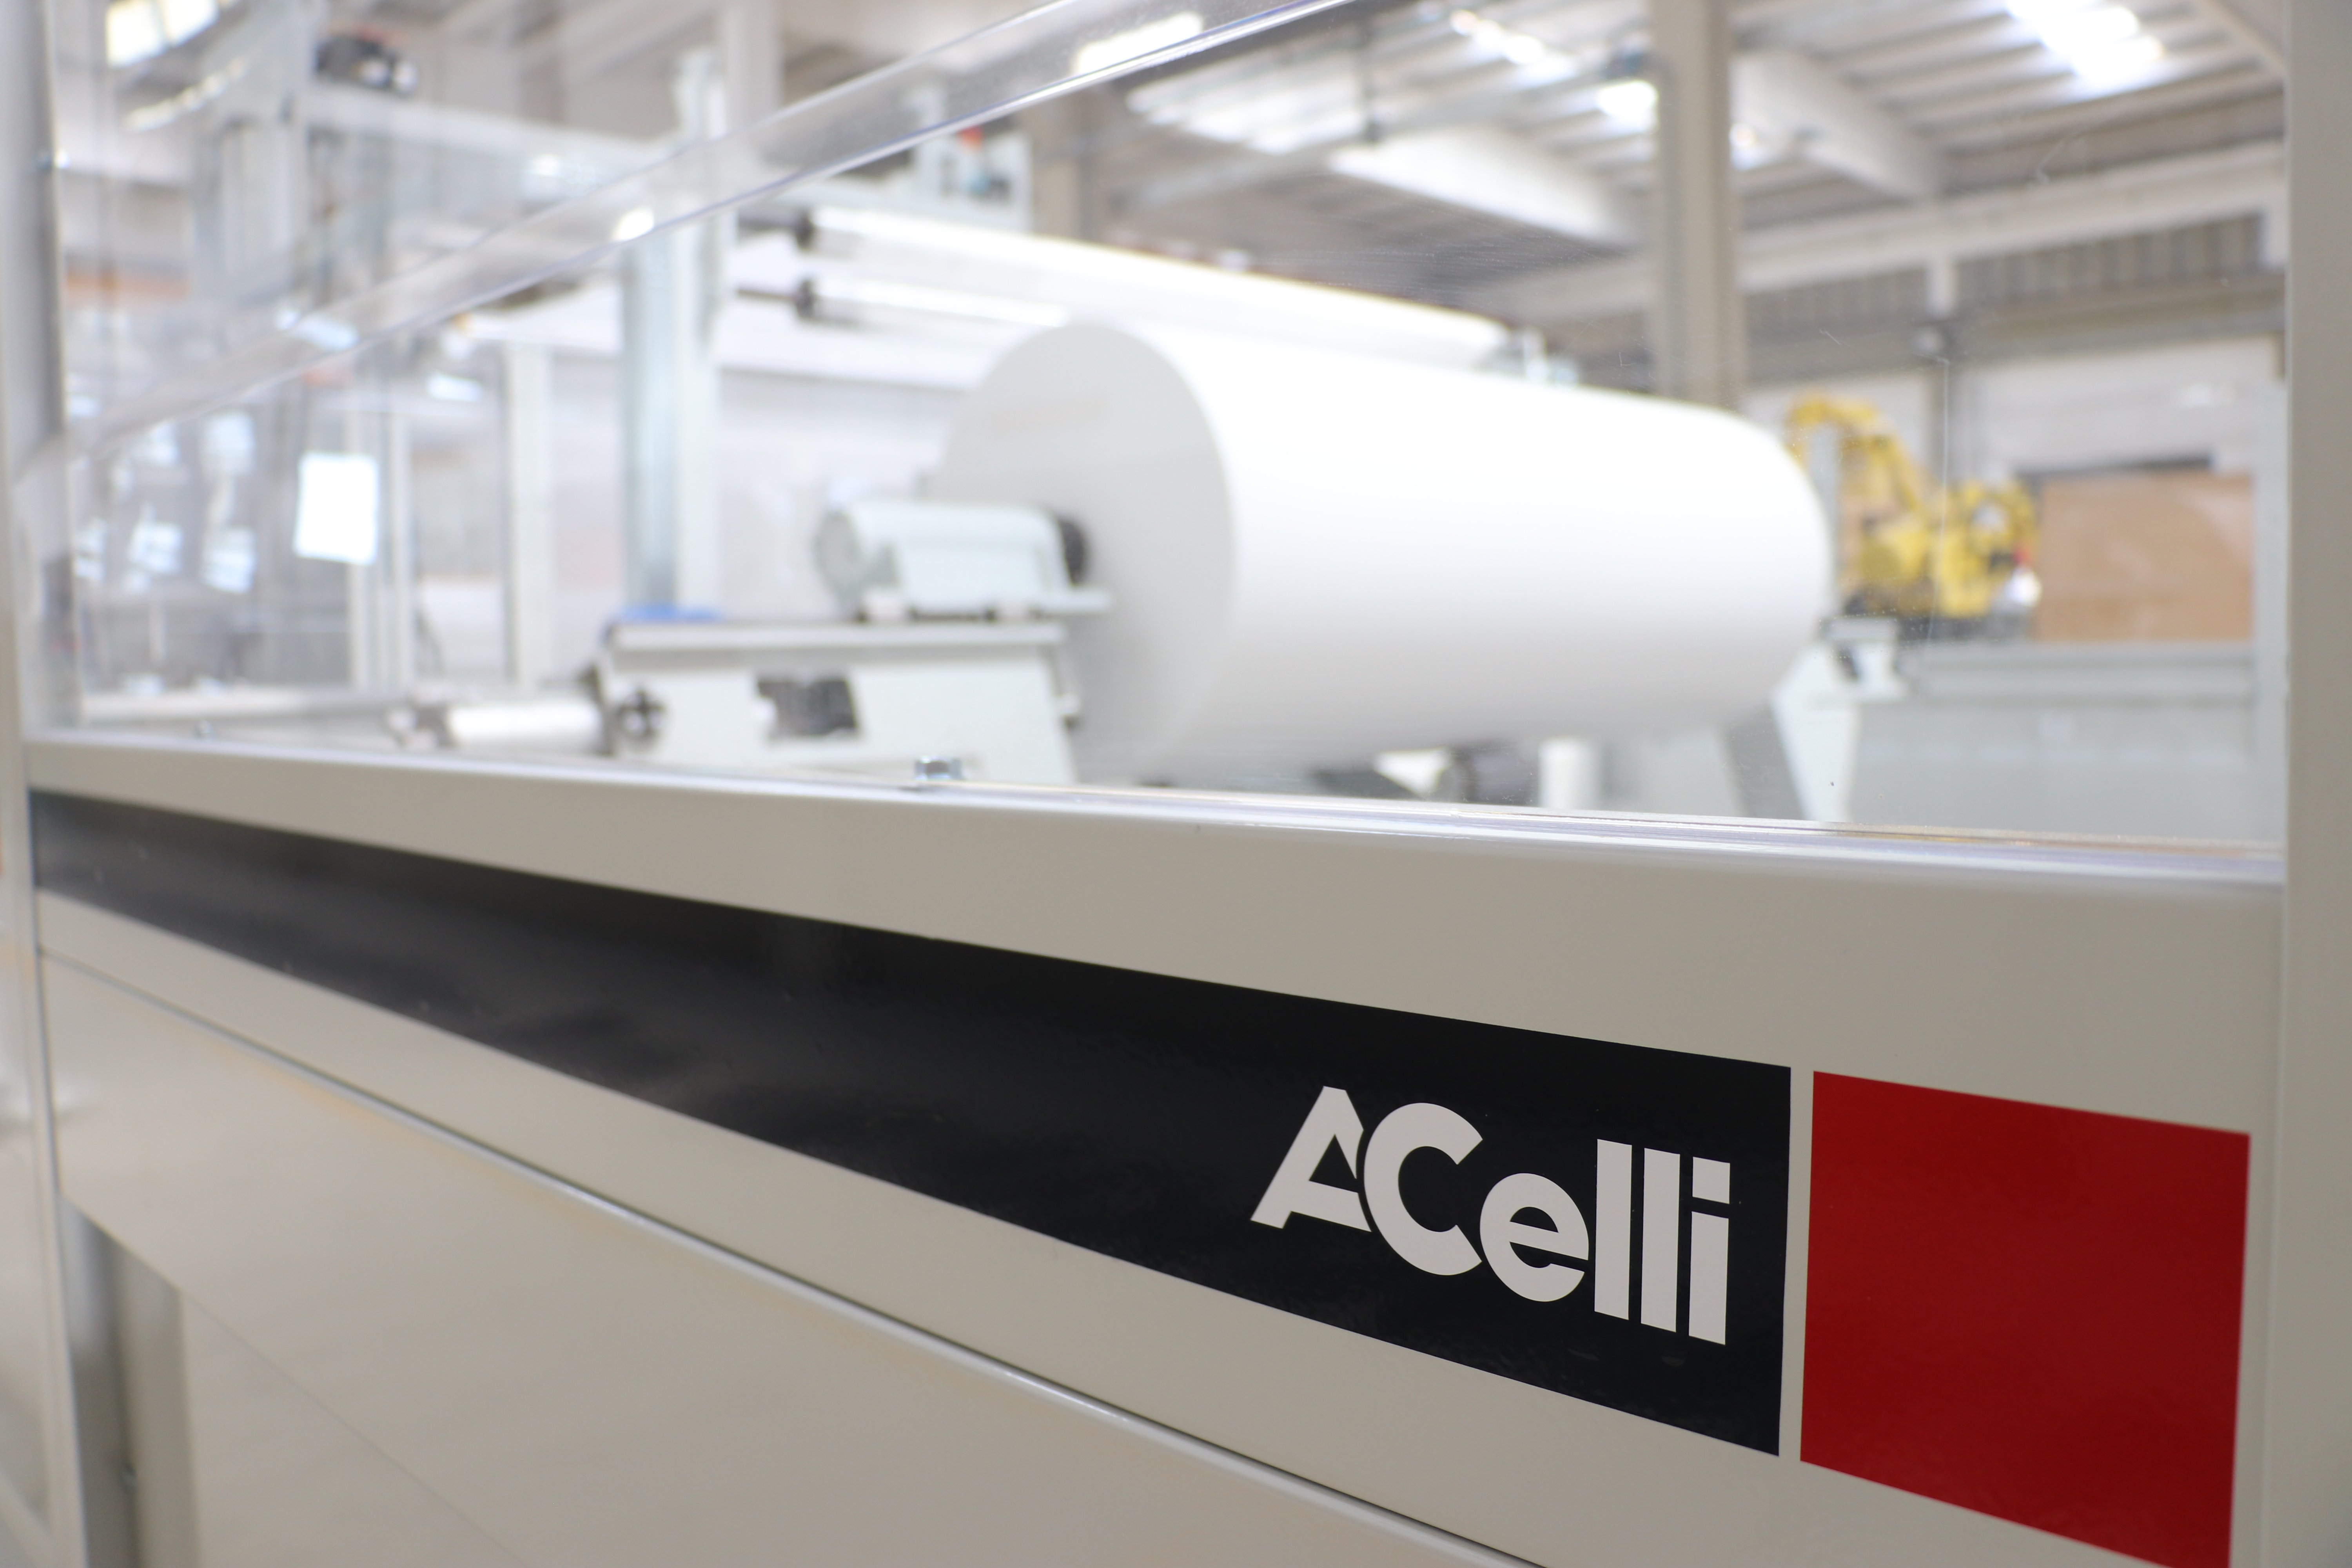 Why choose industrial plant retrofitting by A.Celli?